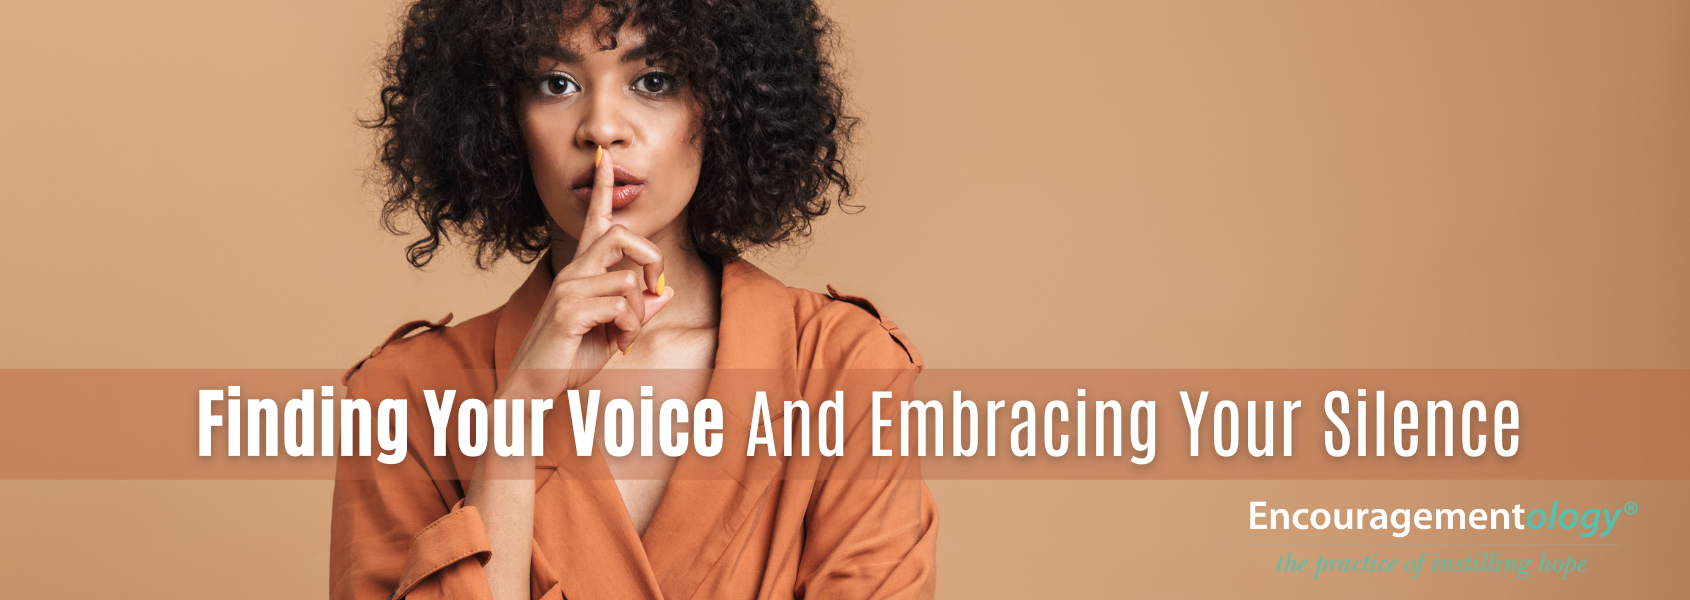 Finding Your Voice And Embracing Your Silence